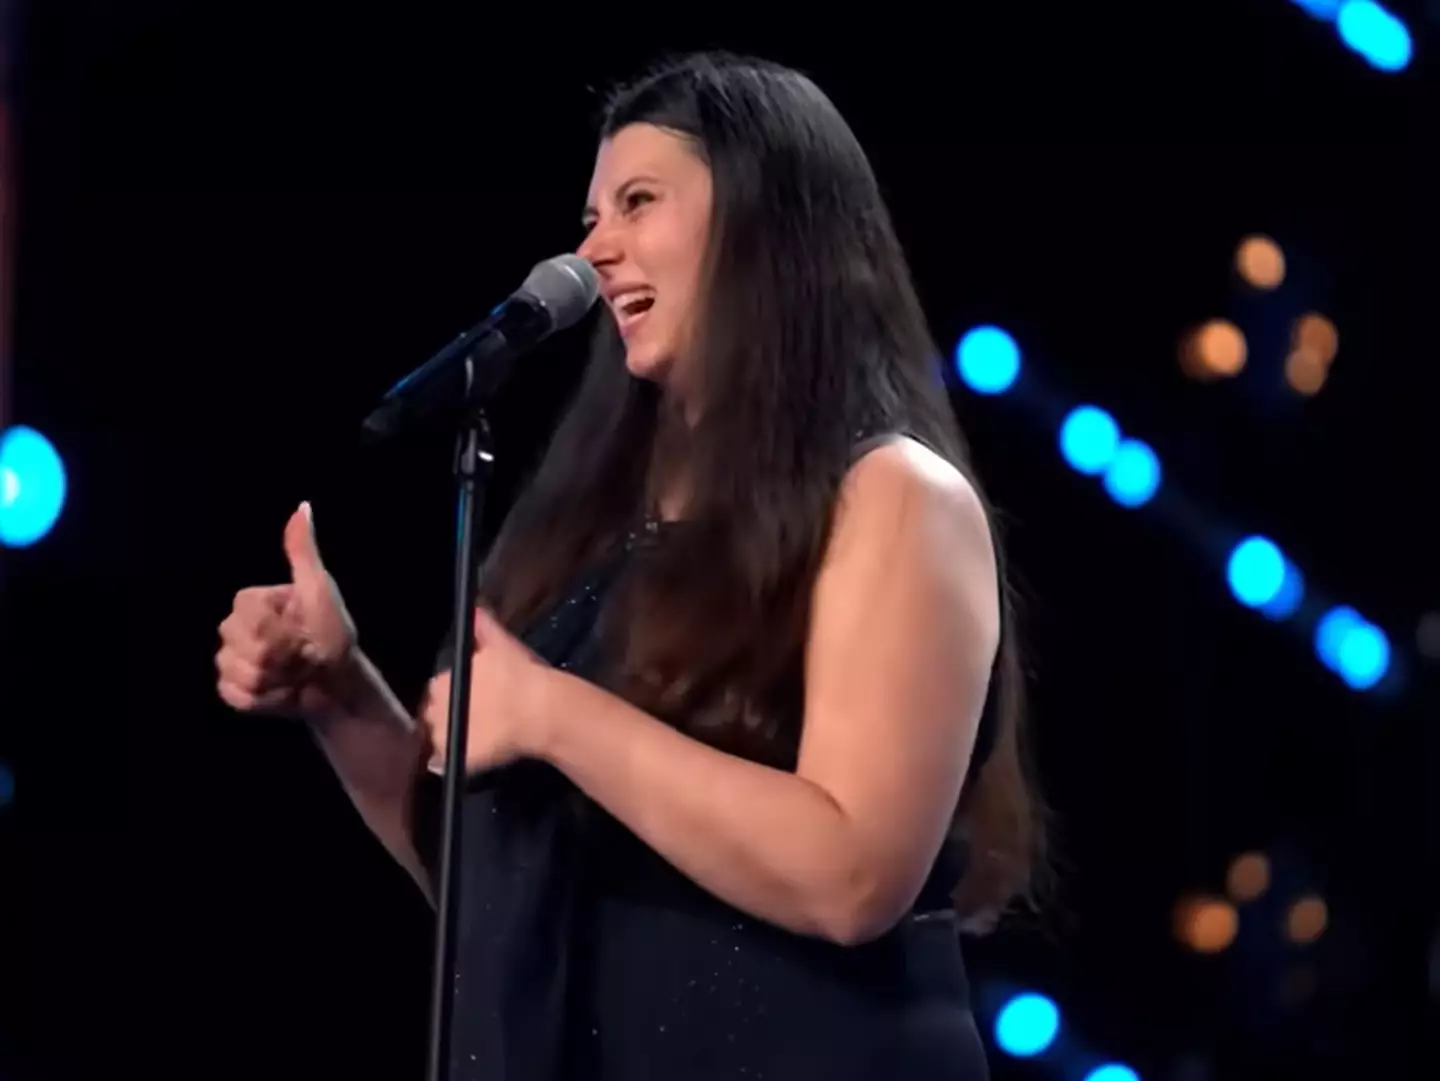 In the end Kimberly sailed through with three 'yes' votes and the judges can't wait to see what she does next. (ITV)